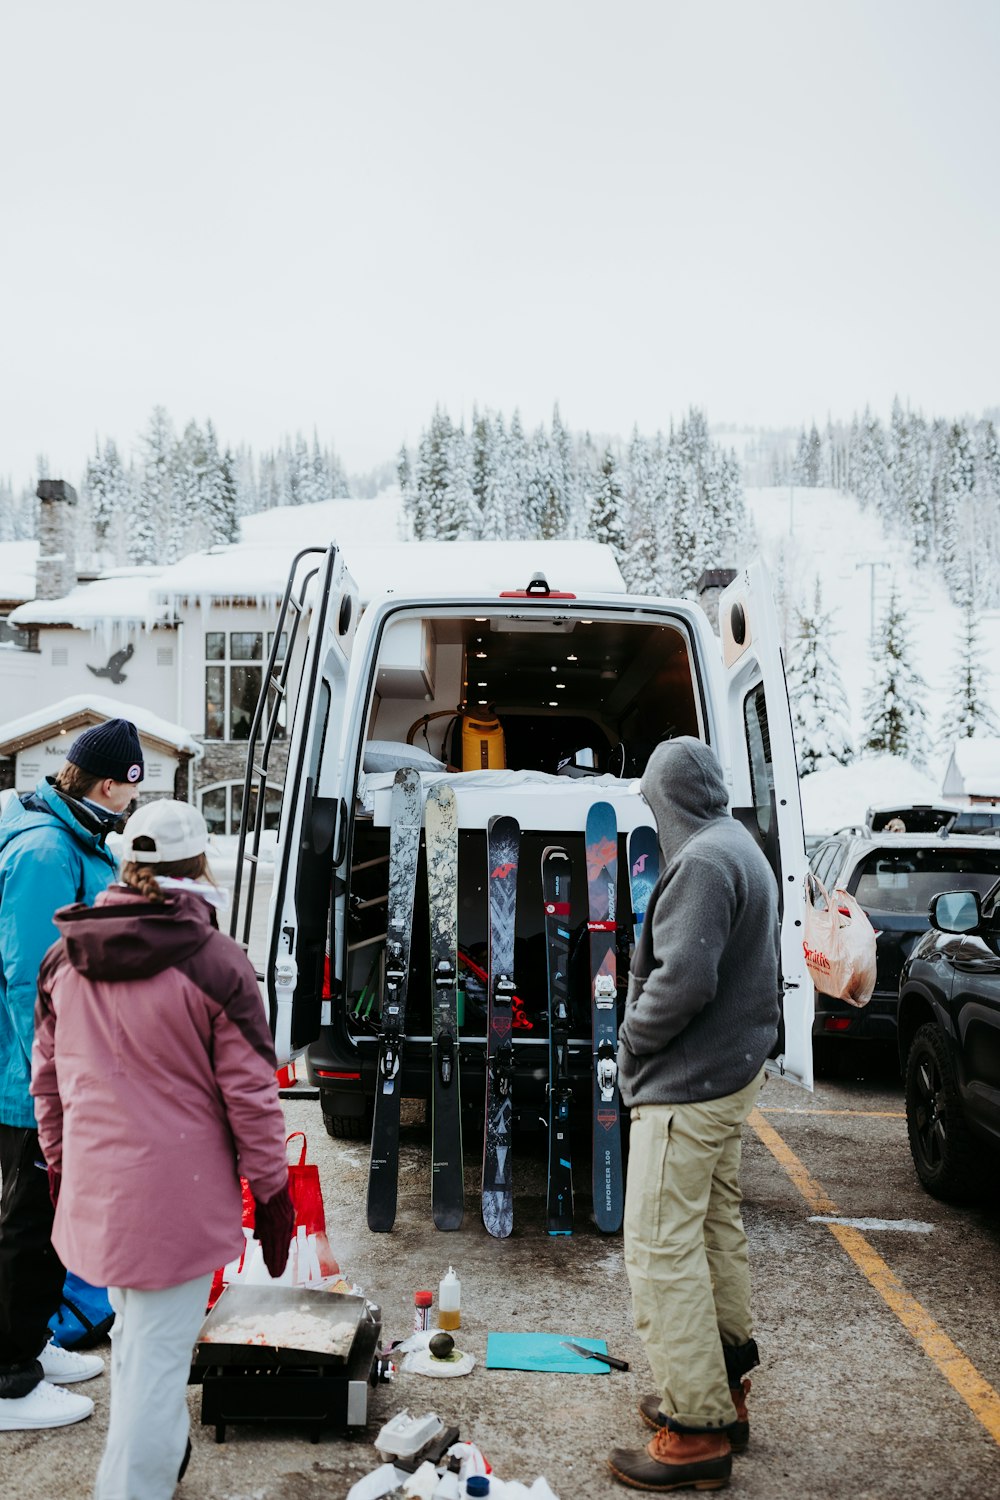 a group of people loading skis into the back of a van